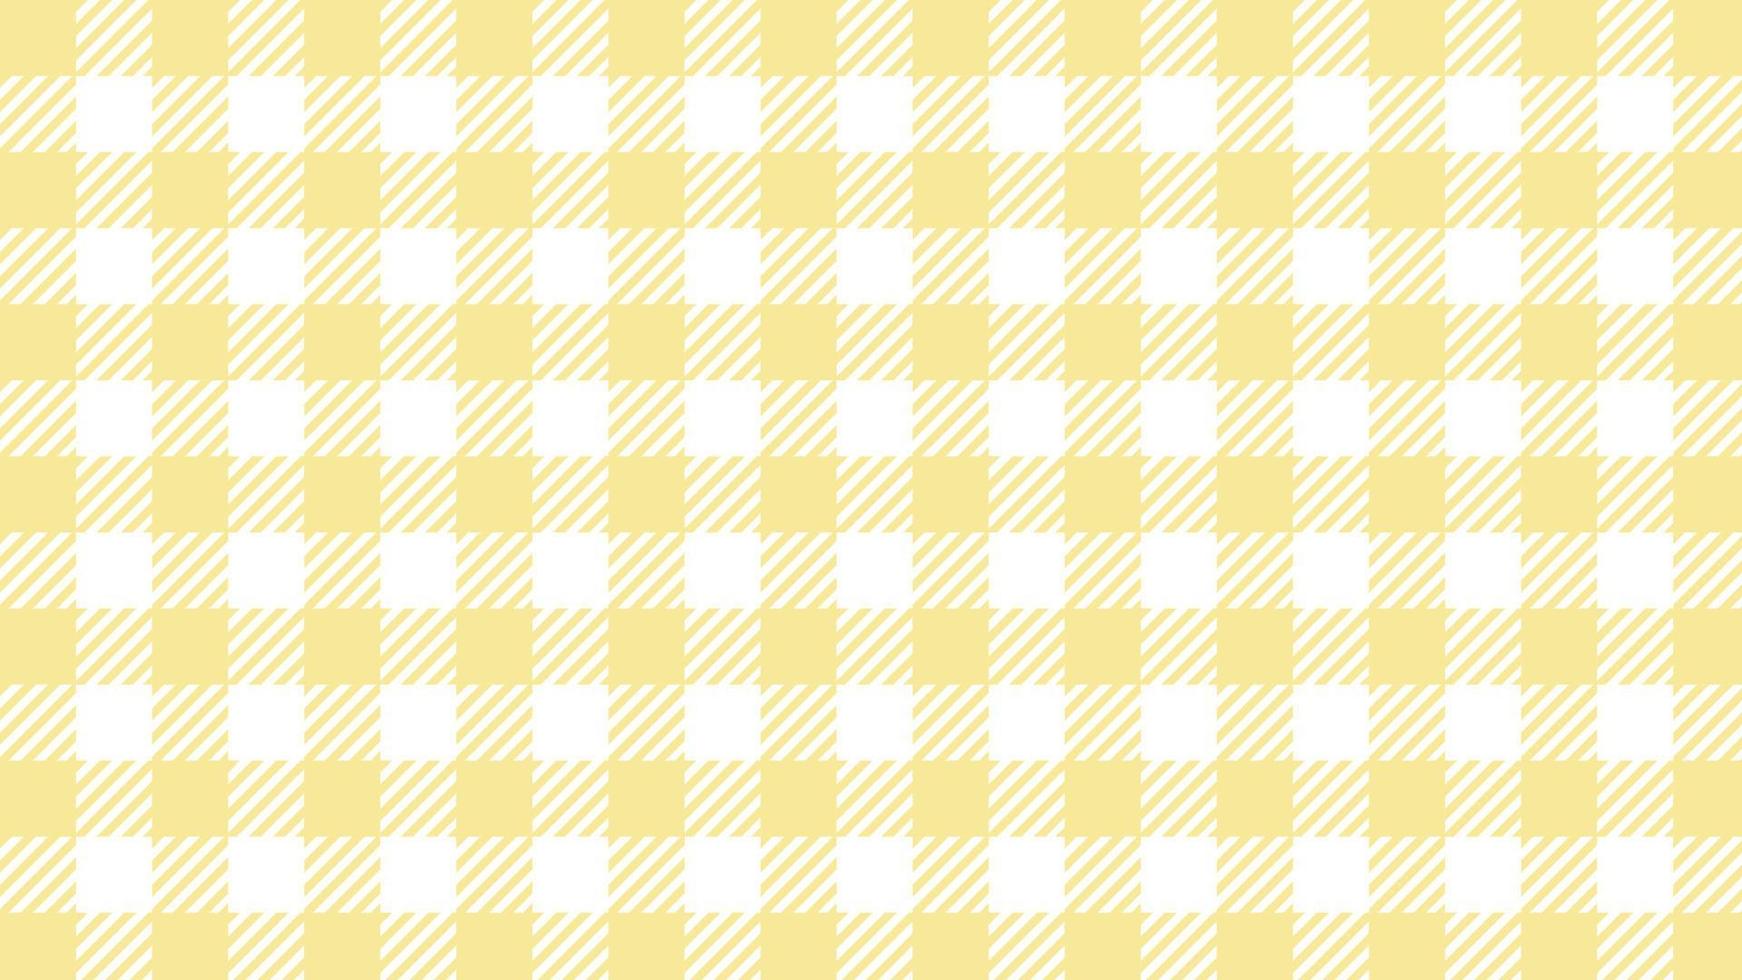 aesthetic soft pastel yellow tartan, gingham, plaid, checkers pattern wallpaper illustration, perfect for banner, wallpaper, backdrop, postcard, background for your design vector